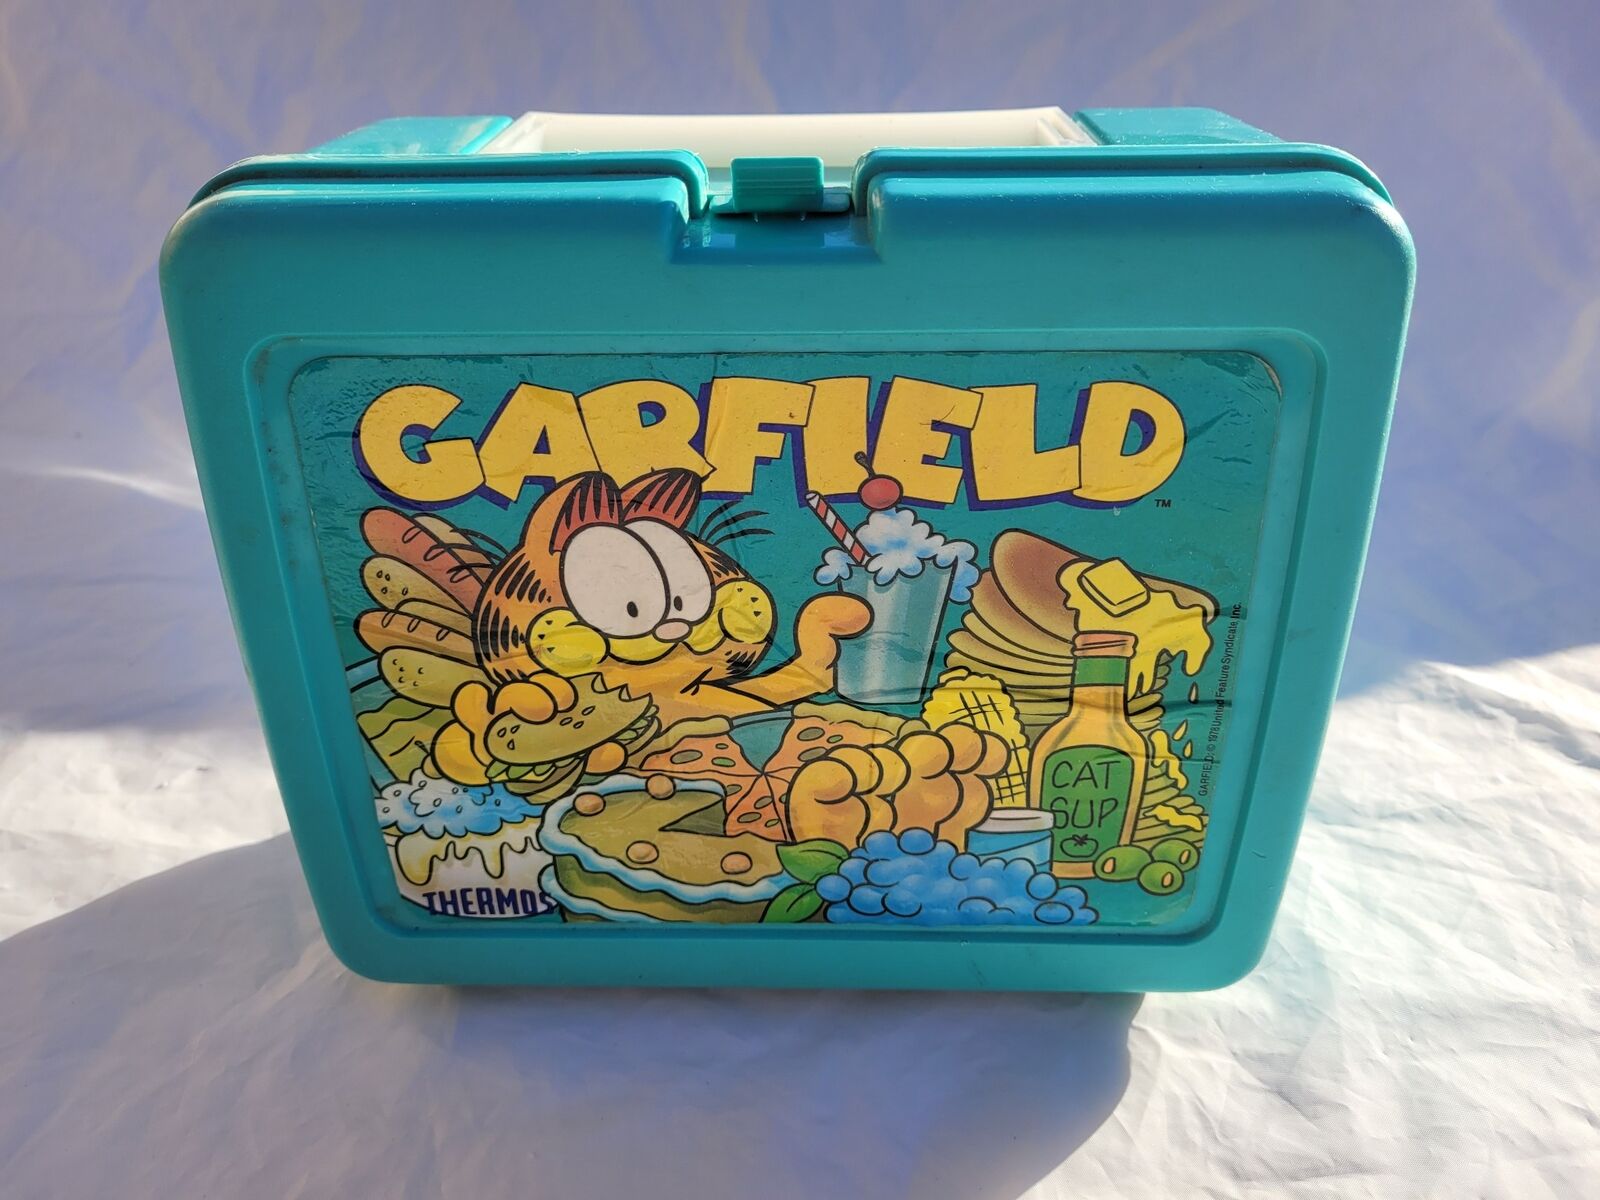 Garfield Thermos and Lunchbox Thermos 1978 Plastic Lunch Box Set